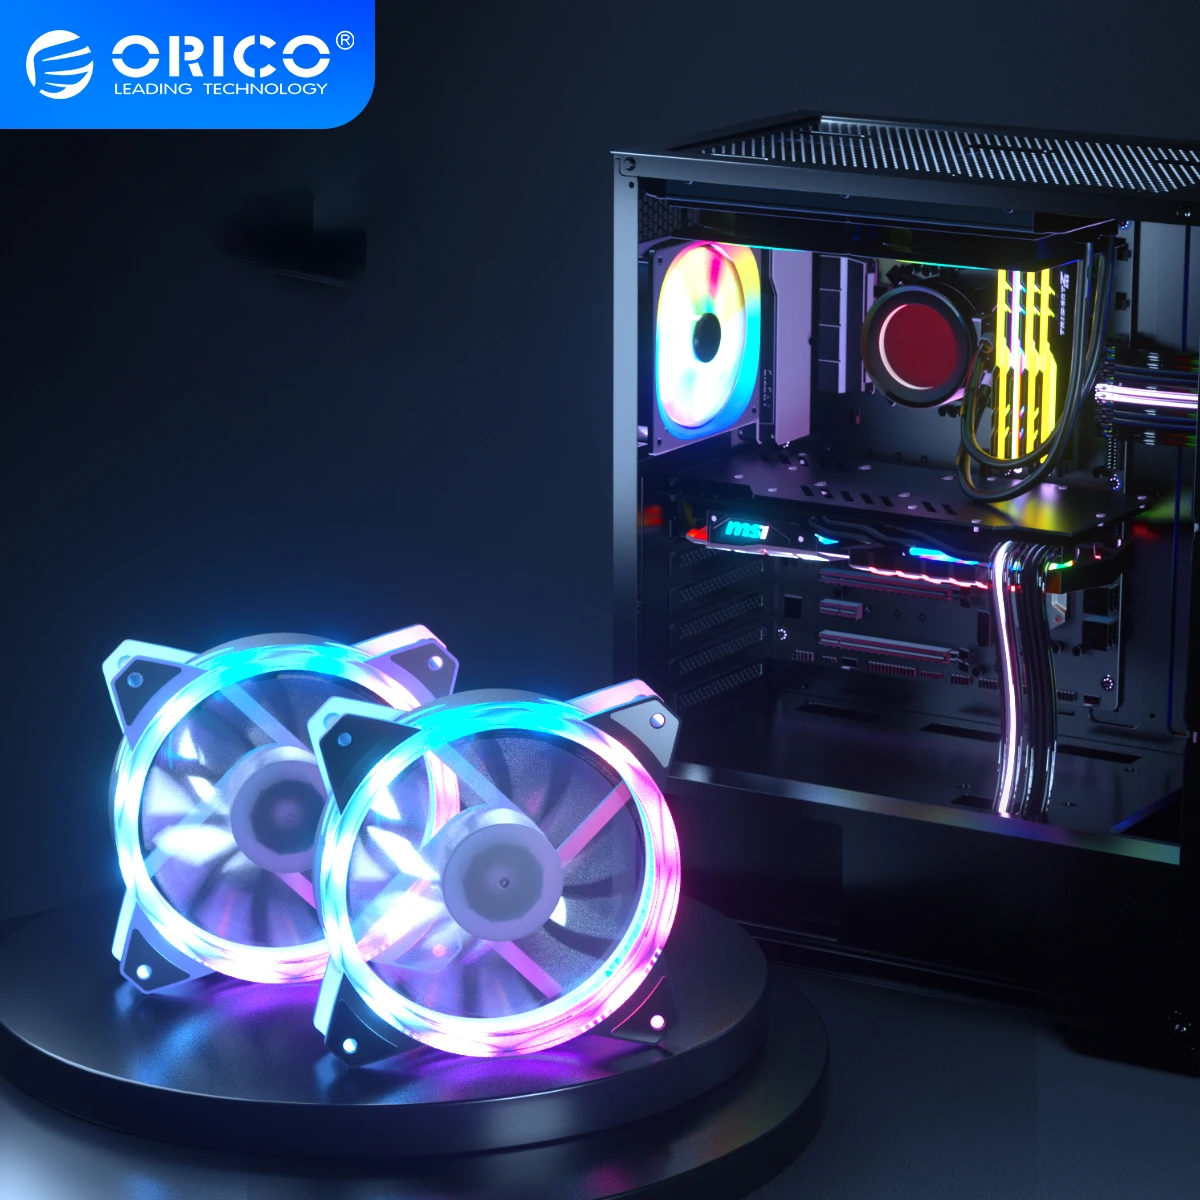 Orico Rgb Case Fans 120mm Diy Pc Computer Case Cooling Fan 6pin Adjustable Led Quiet For Gaming Pc Components Cooling & Tools - AliExpress